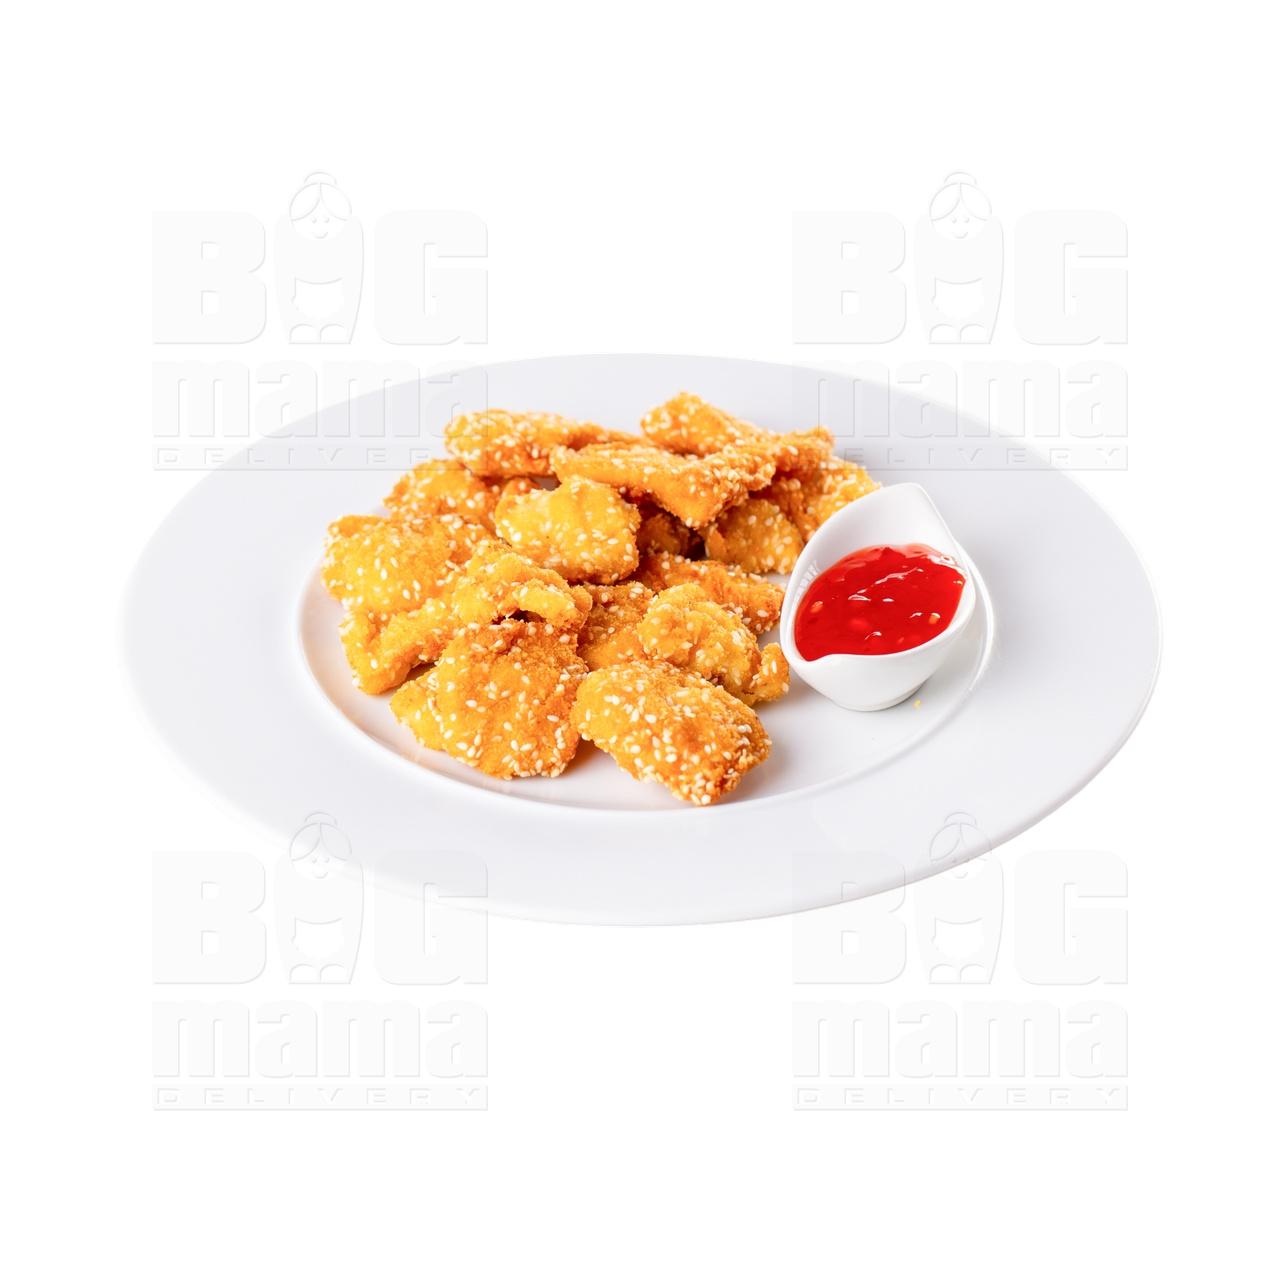 Product #266 image - Chicken nuggets